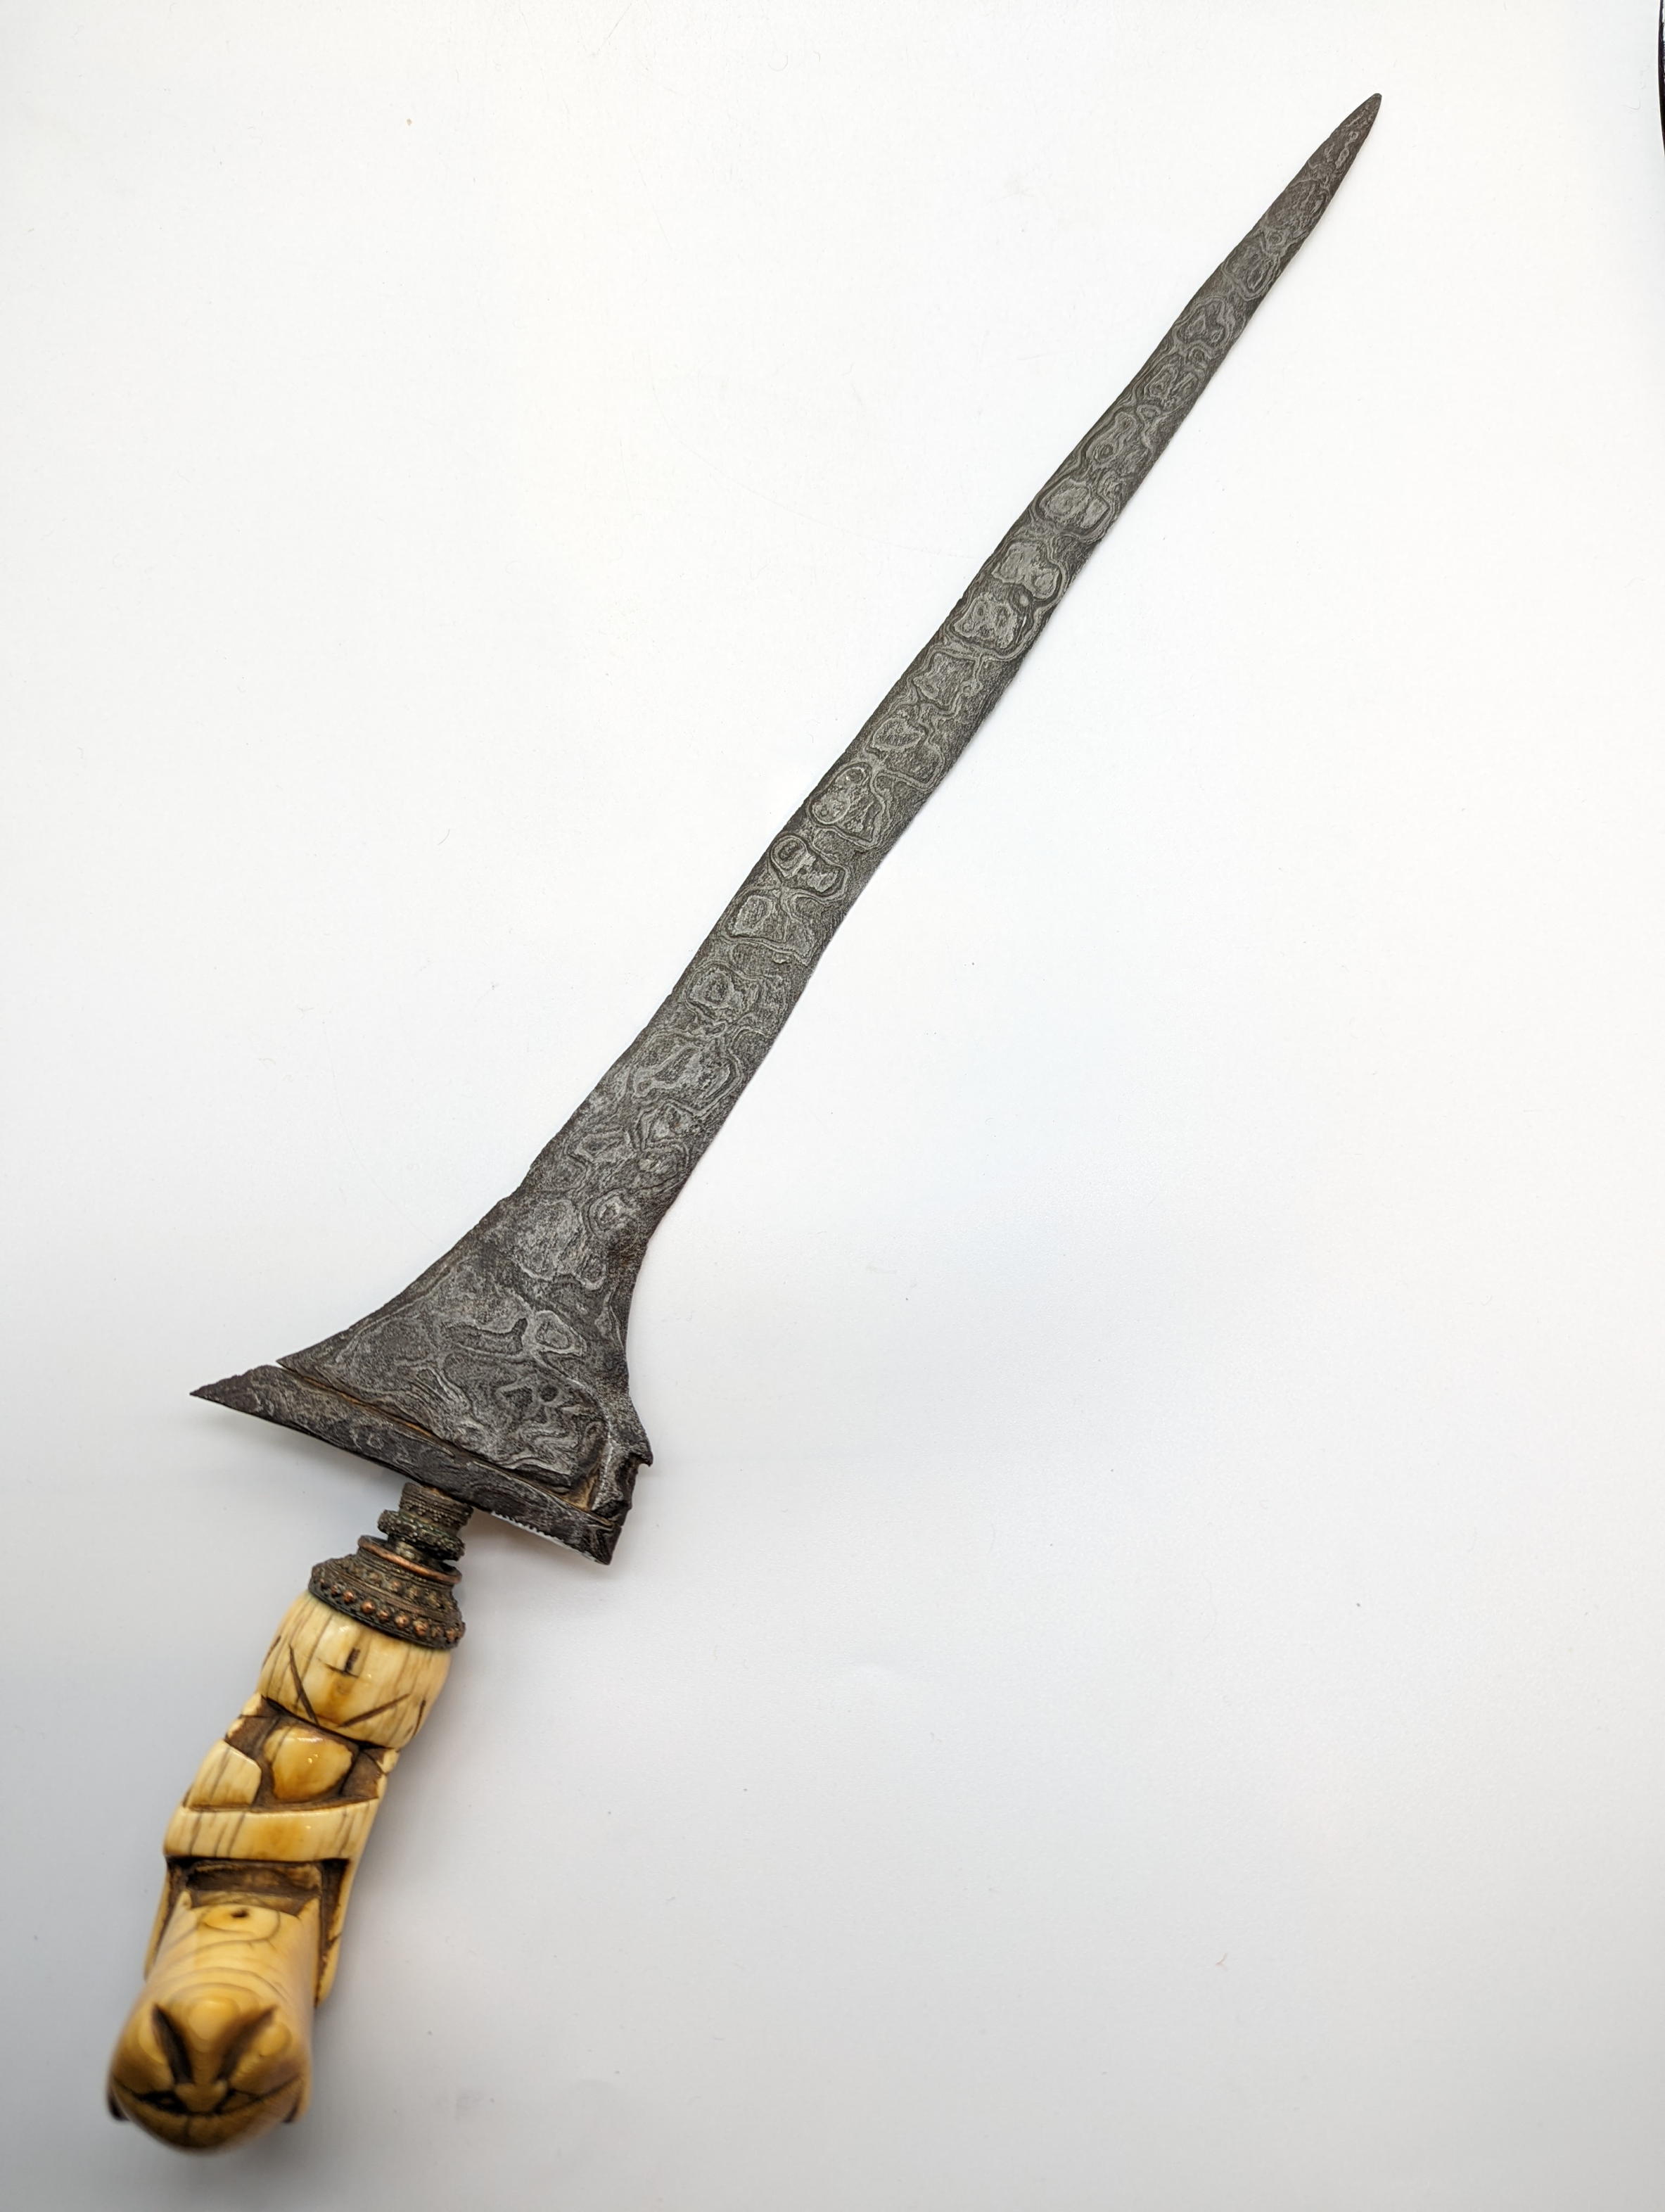 A 16th century Kris Perkaka dagger, iron layered pamour blade, ivory hilt with nickel, Northern